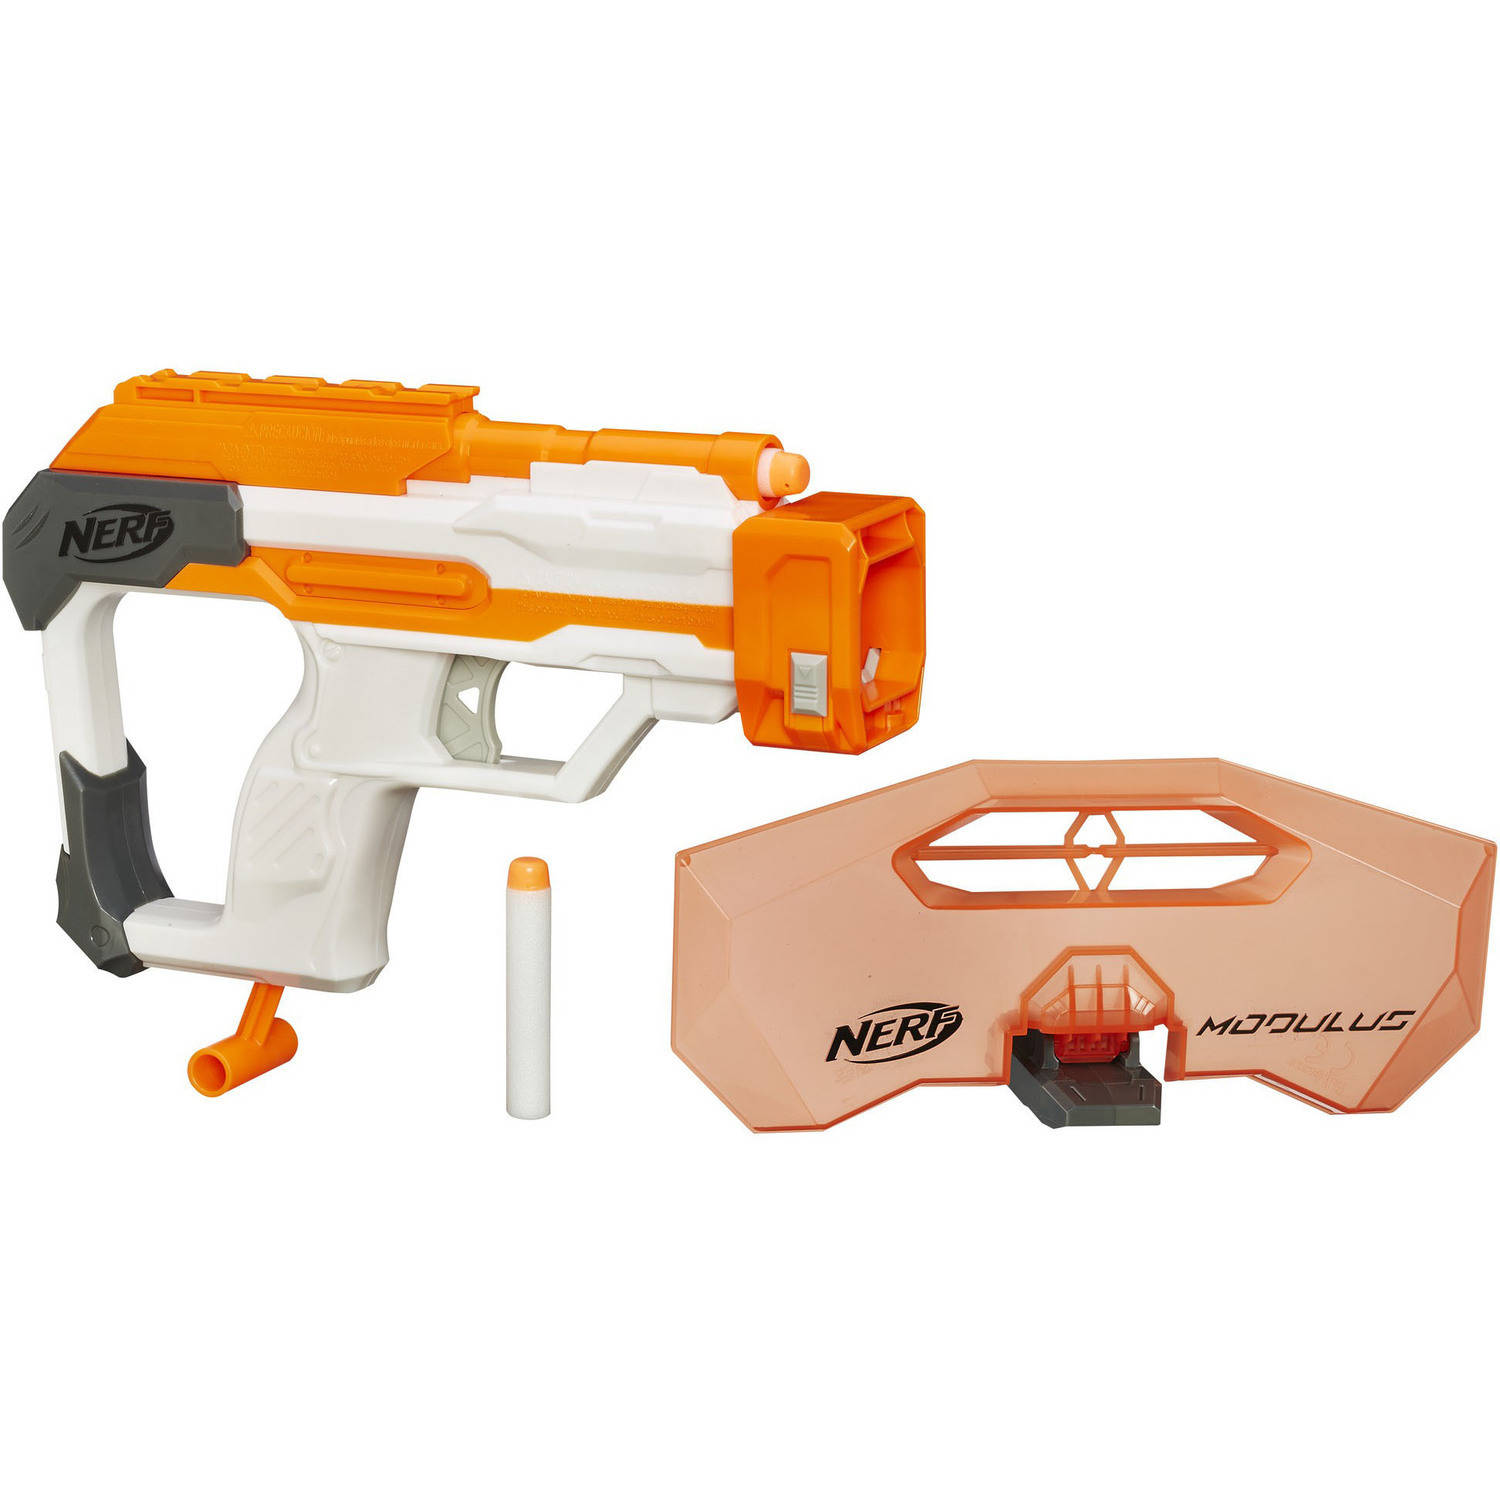 Nerf Modulus Strike and Defend Upgrade Kit, for Kids Ages 8 and Up - image 1 of 2